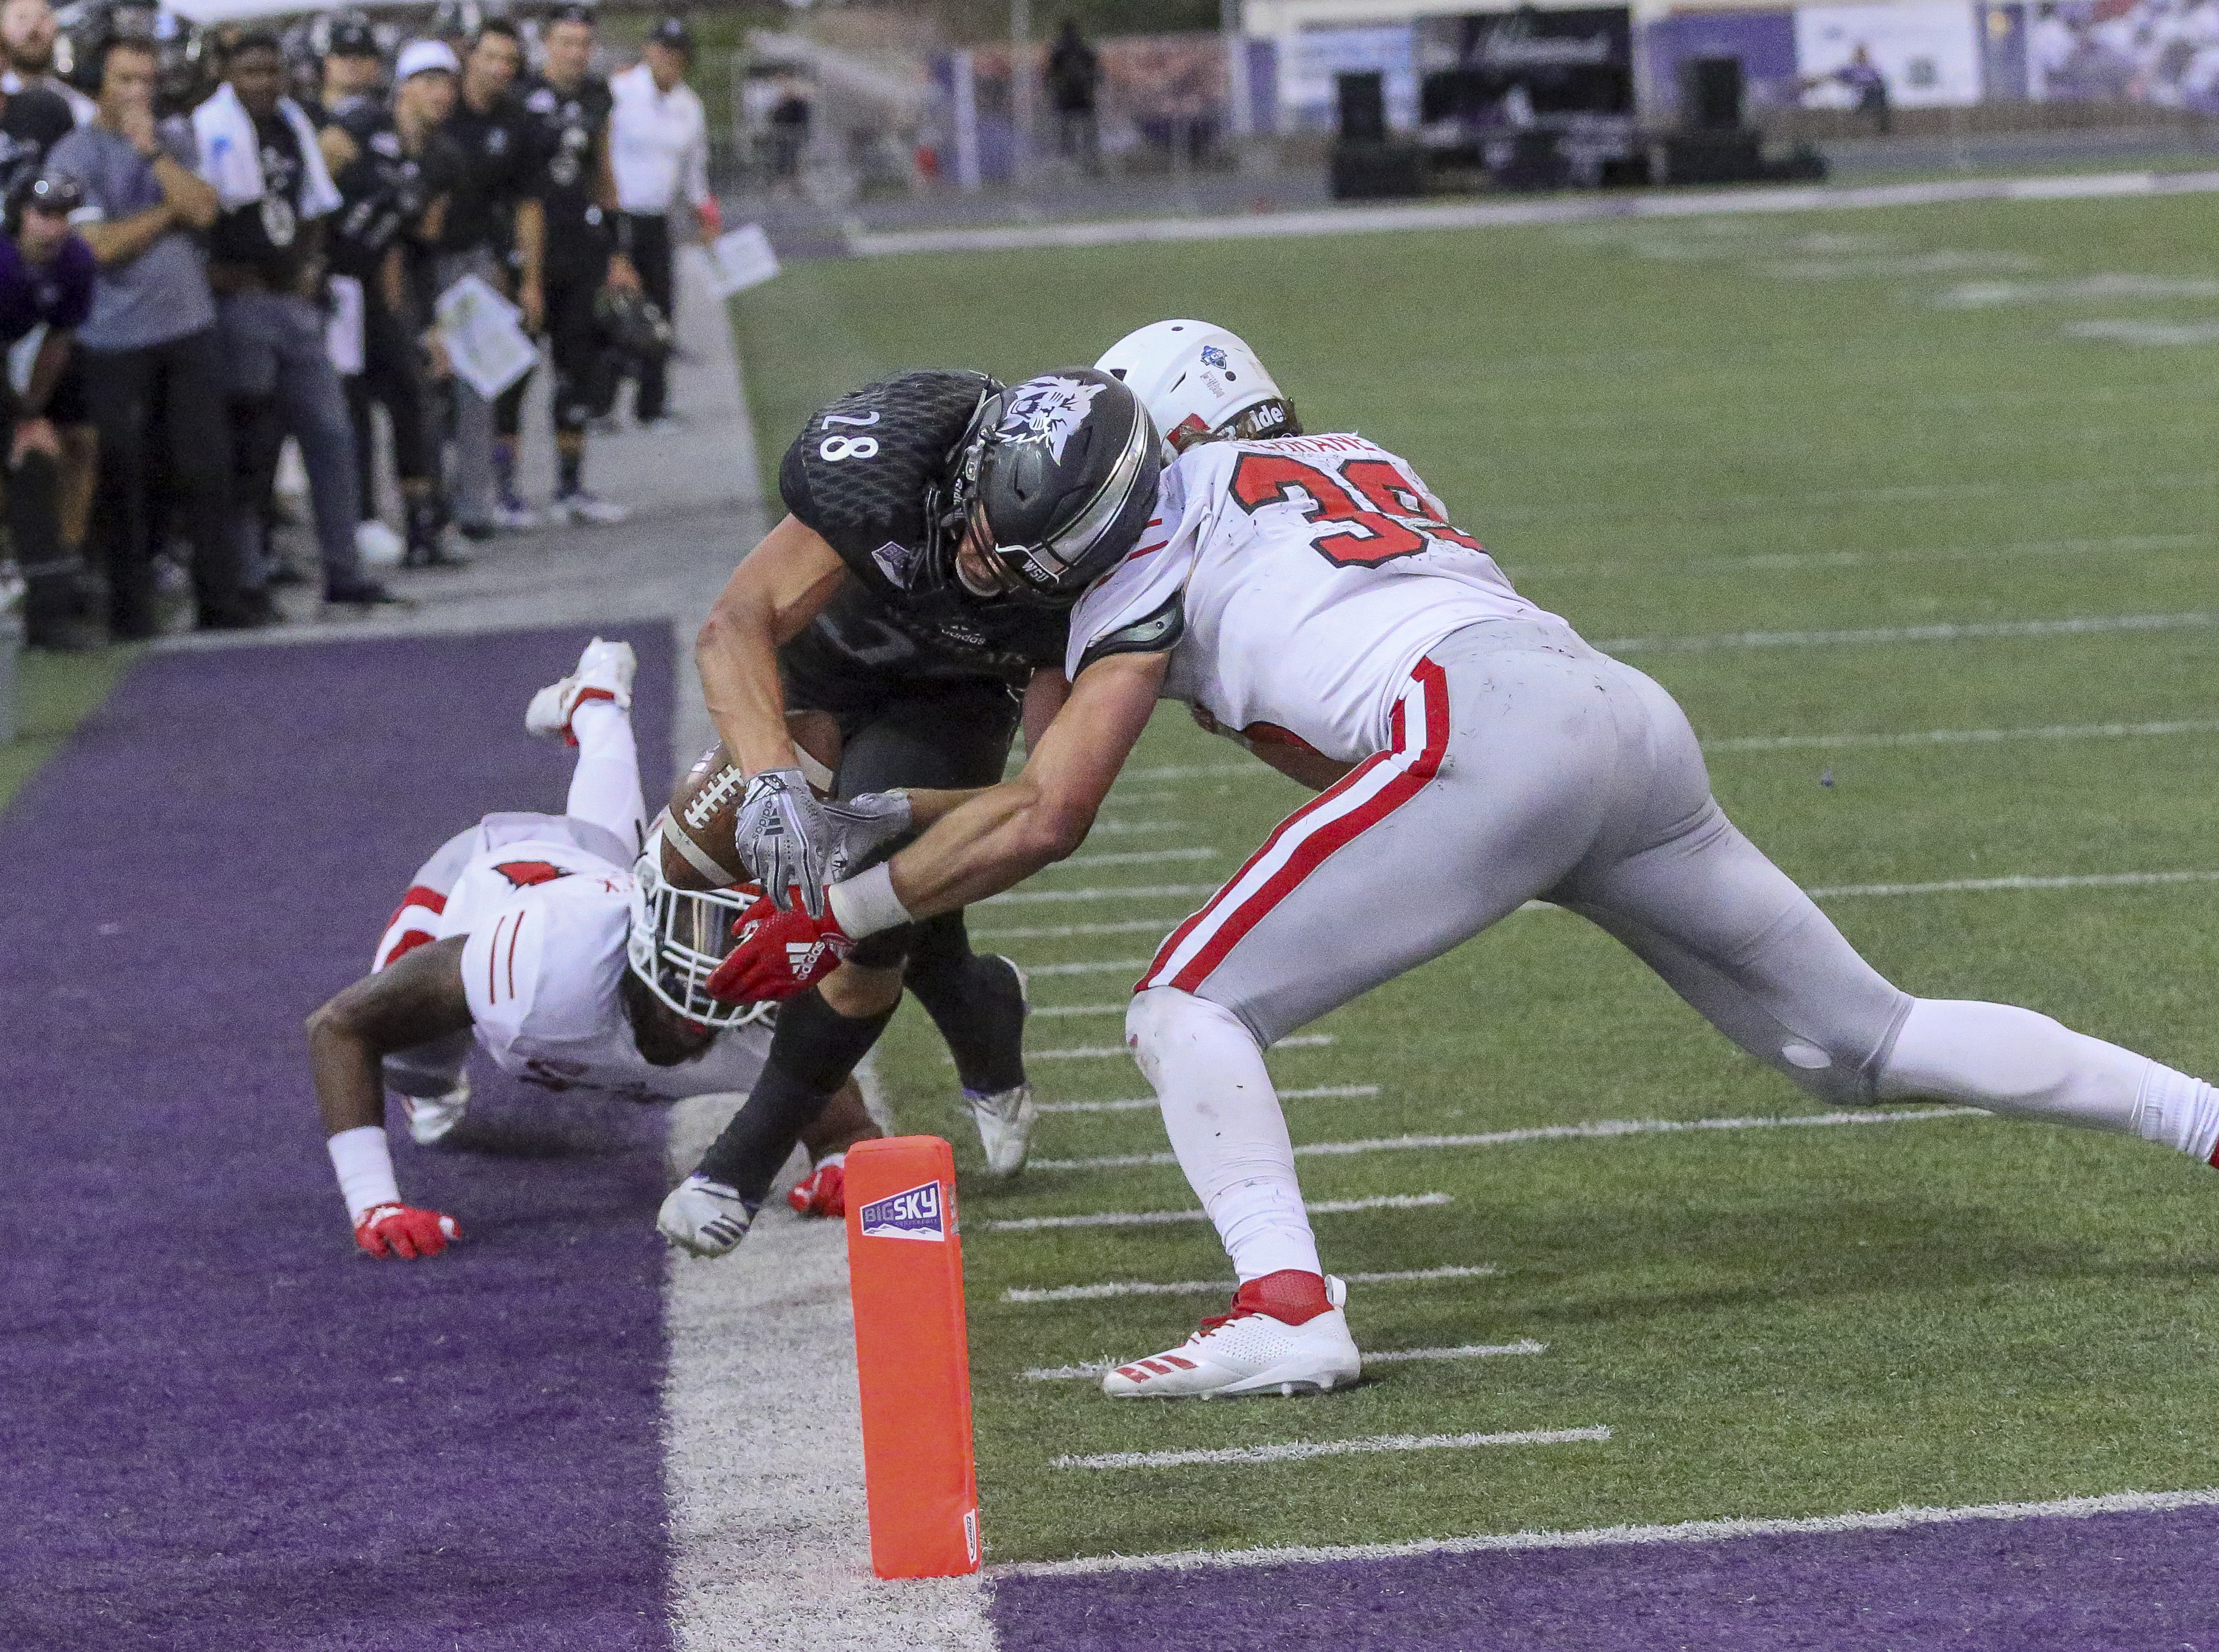 USD falls to Weber State 27-10